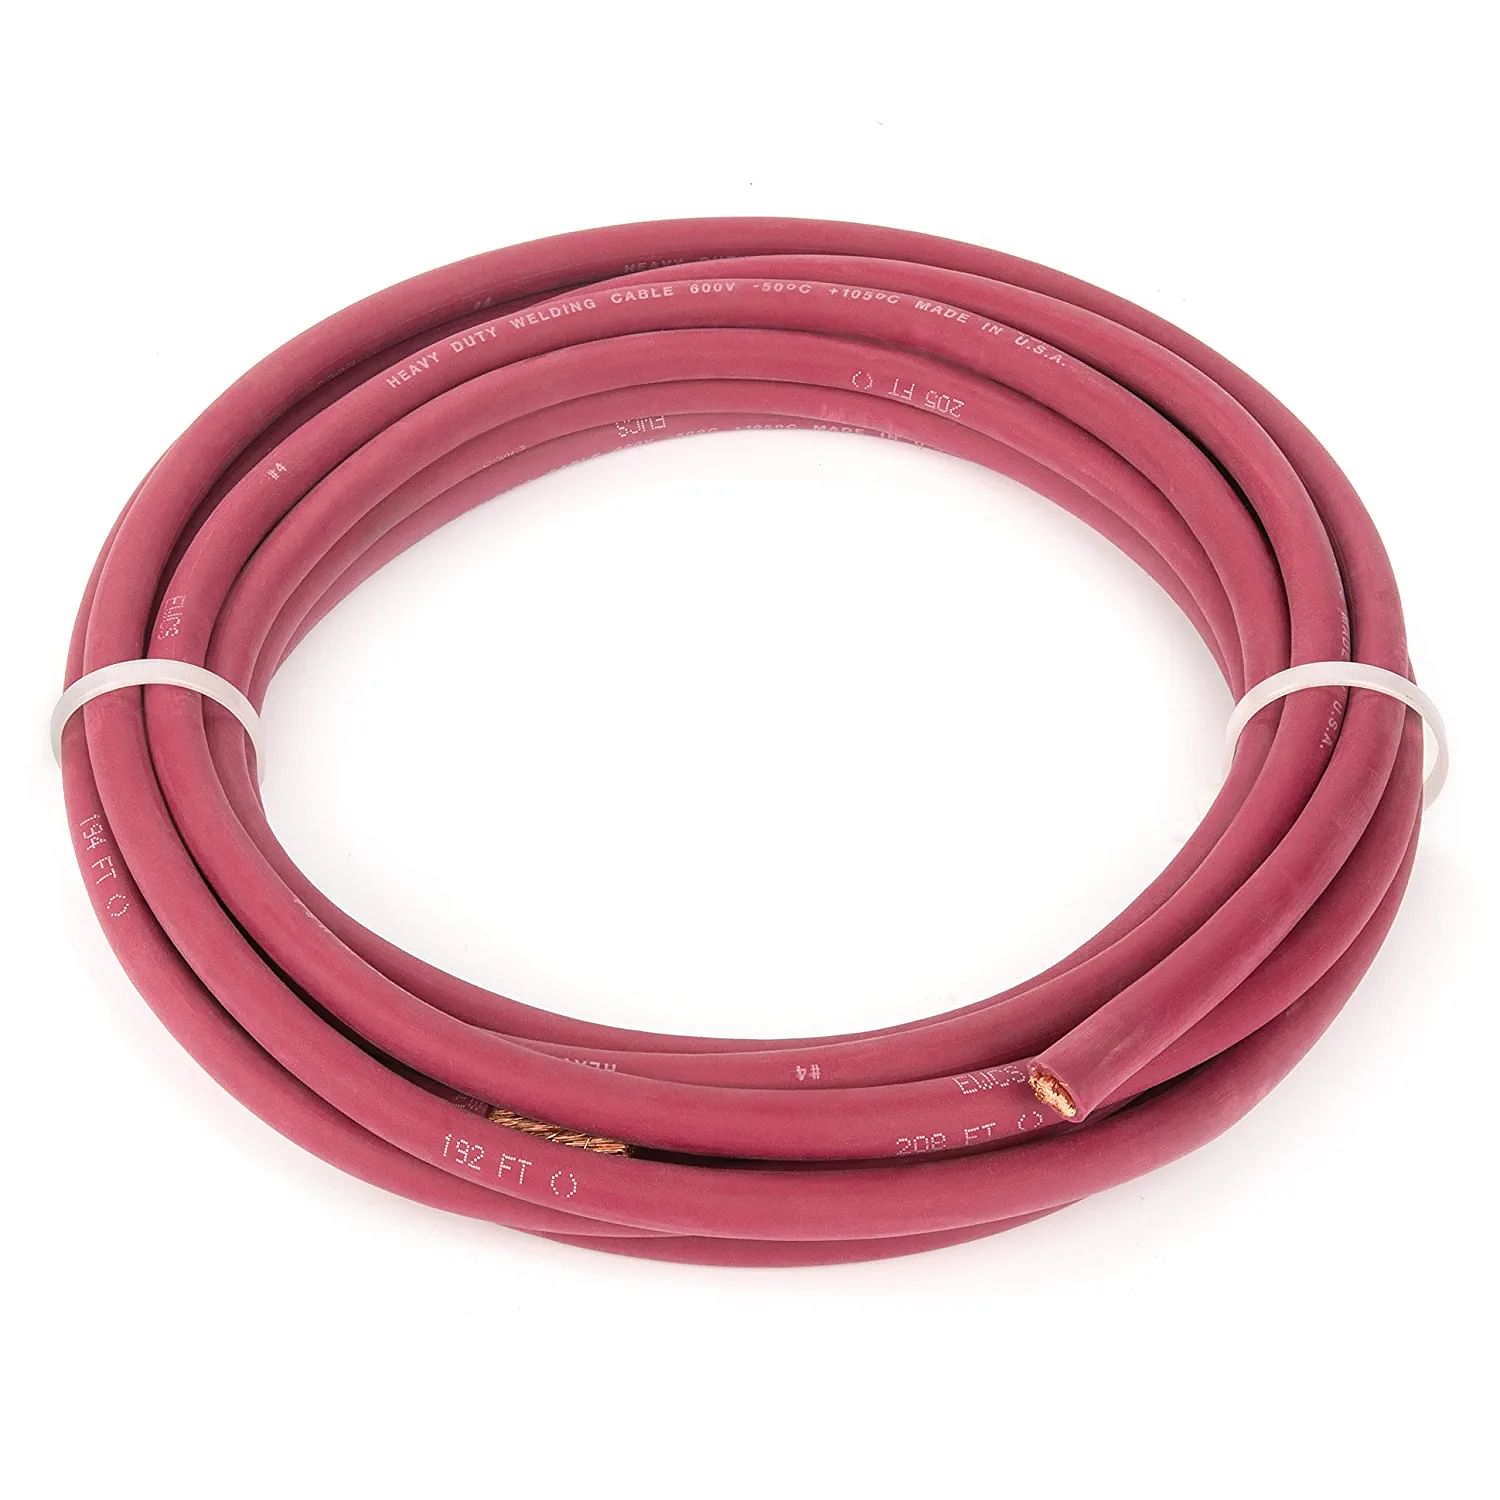 100/100V CE ROHS Certified 1X35mm2 Yh H01n2-D Neoprene Rubber Insulated Flexible Copper Welding Cable